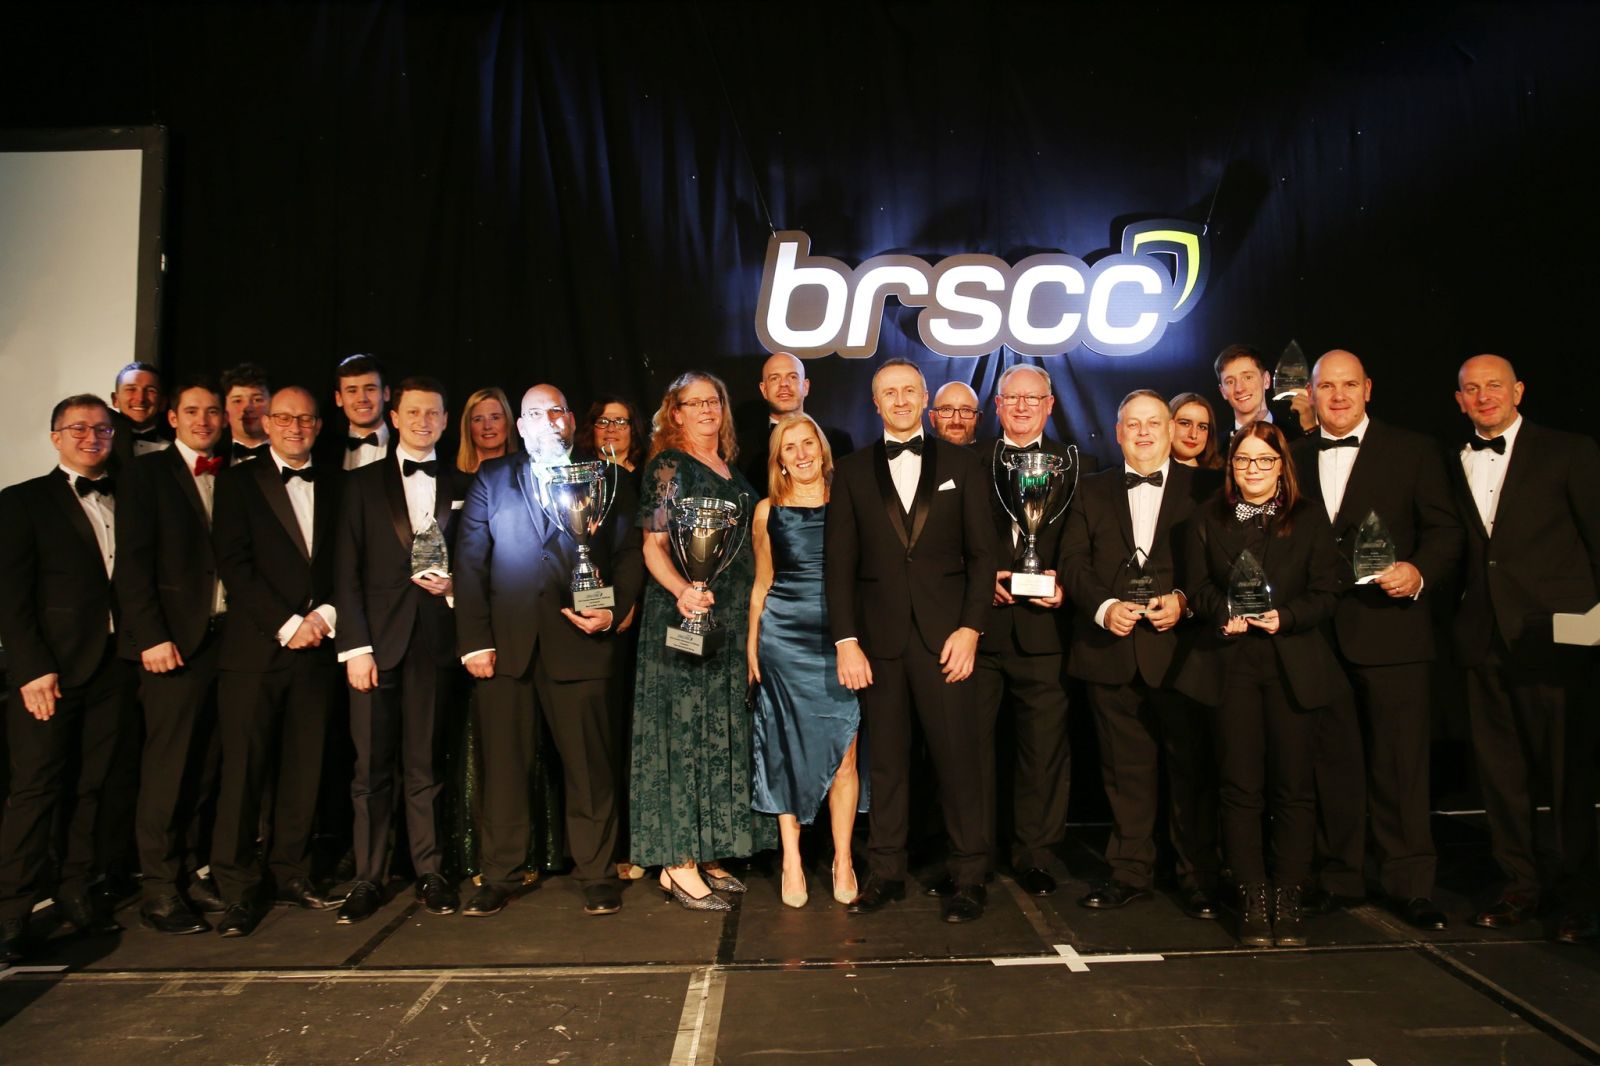 Group picture of everyone involved in the awards ceremony